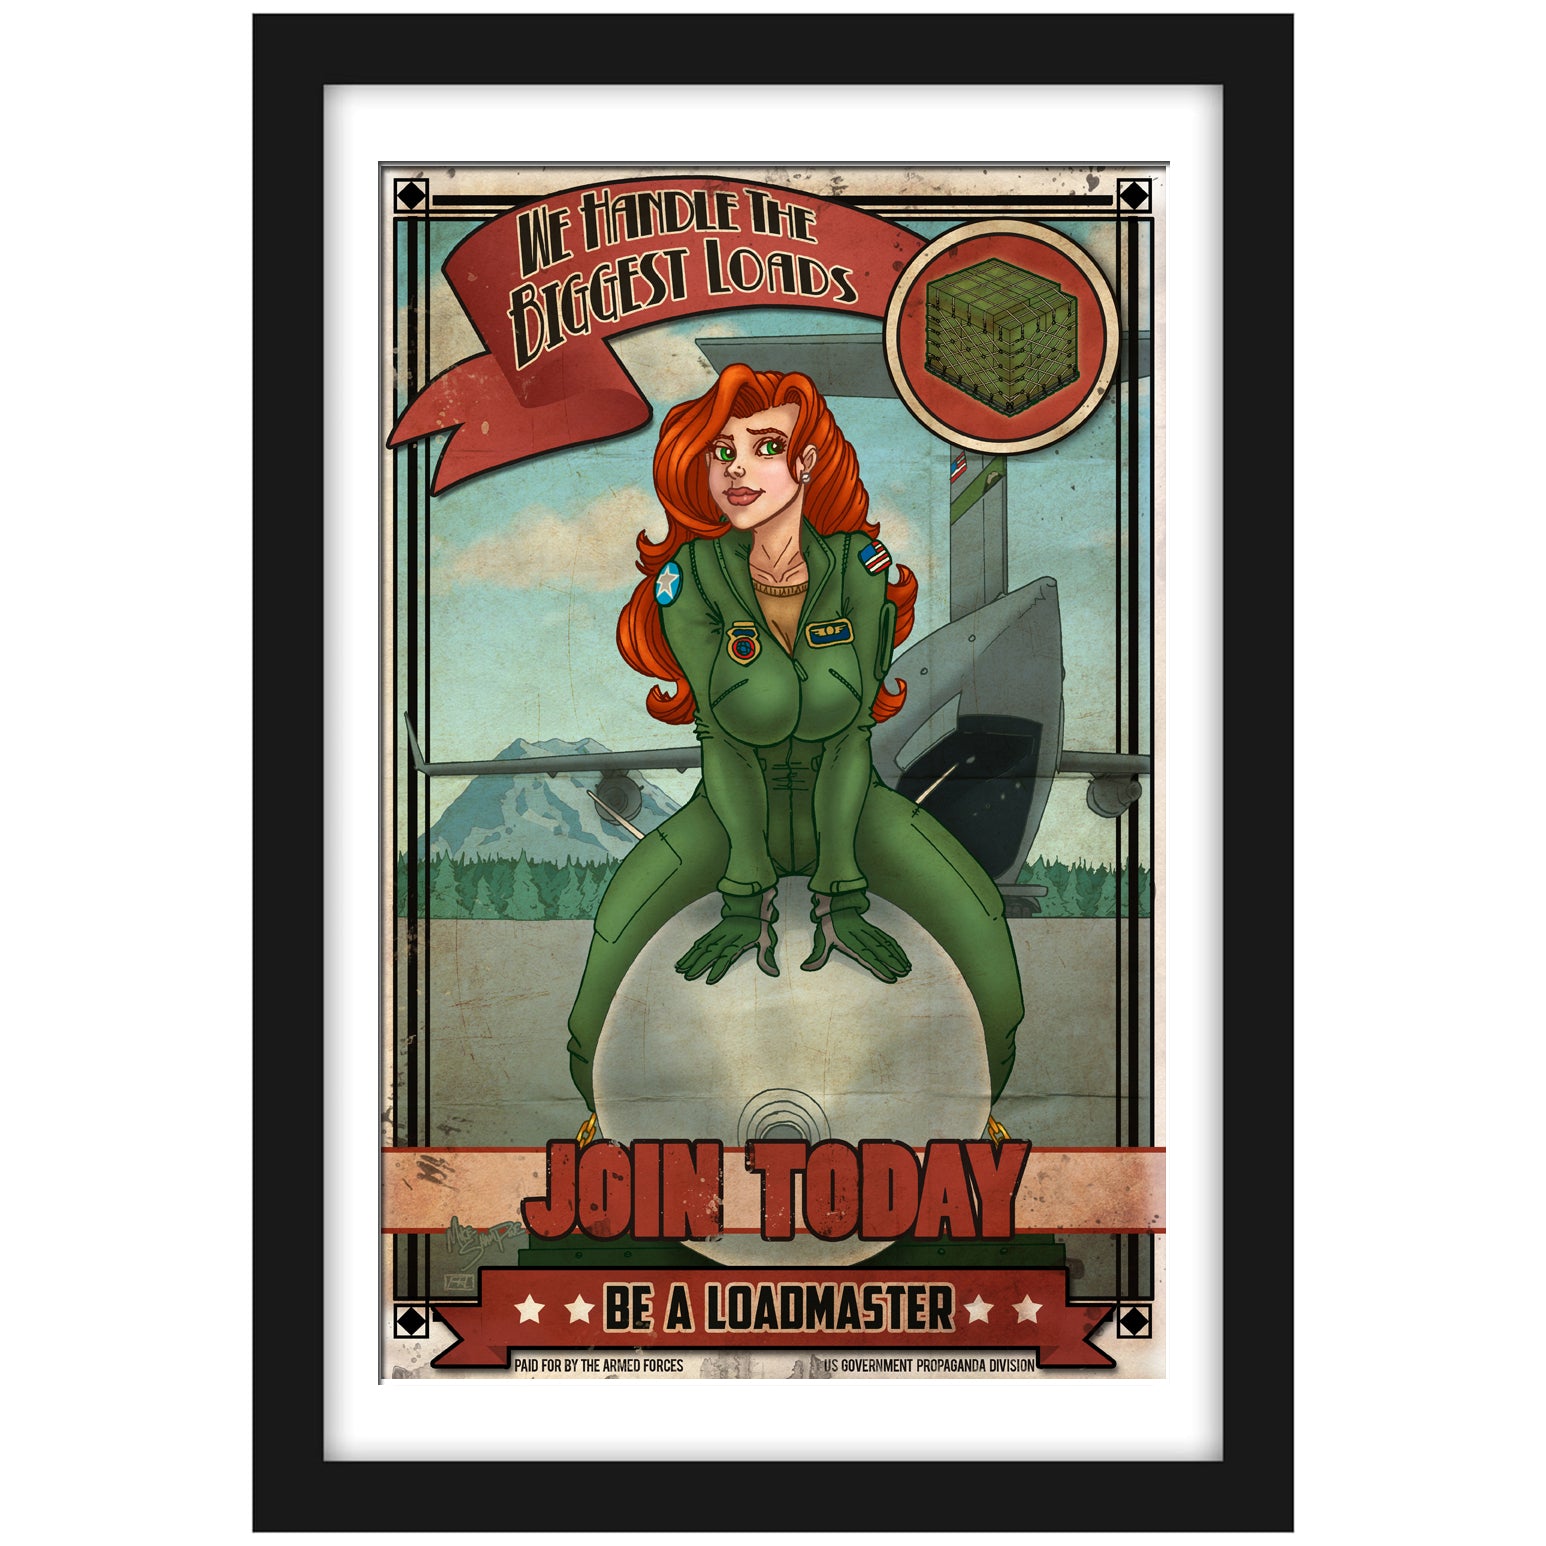 C-17 "Be A Loadmaster" - Vintage Print Pinup & Airplane Art by Mike Shampine - Signed and Numbered